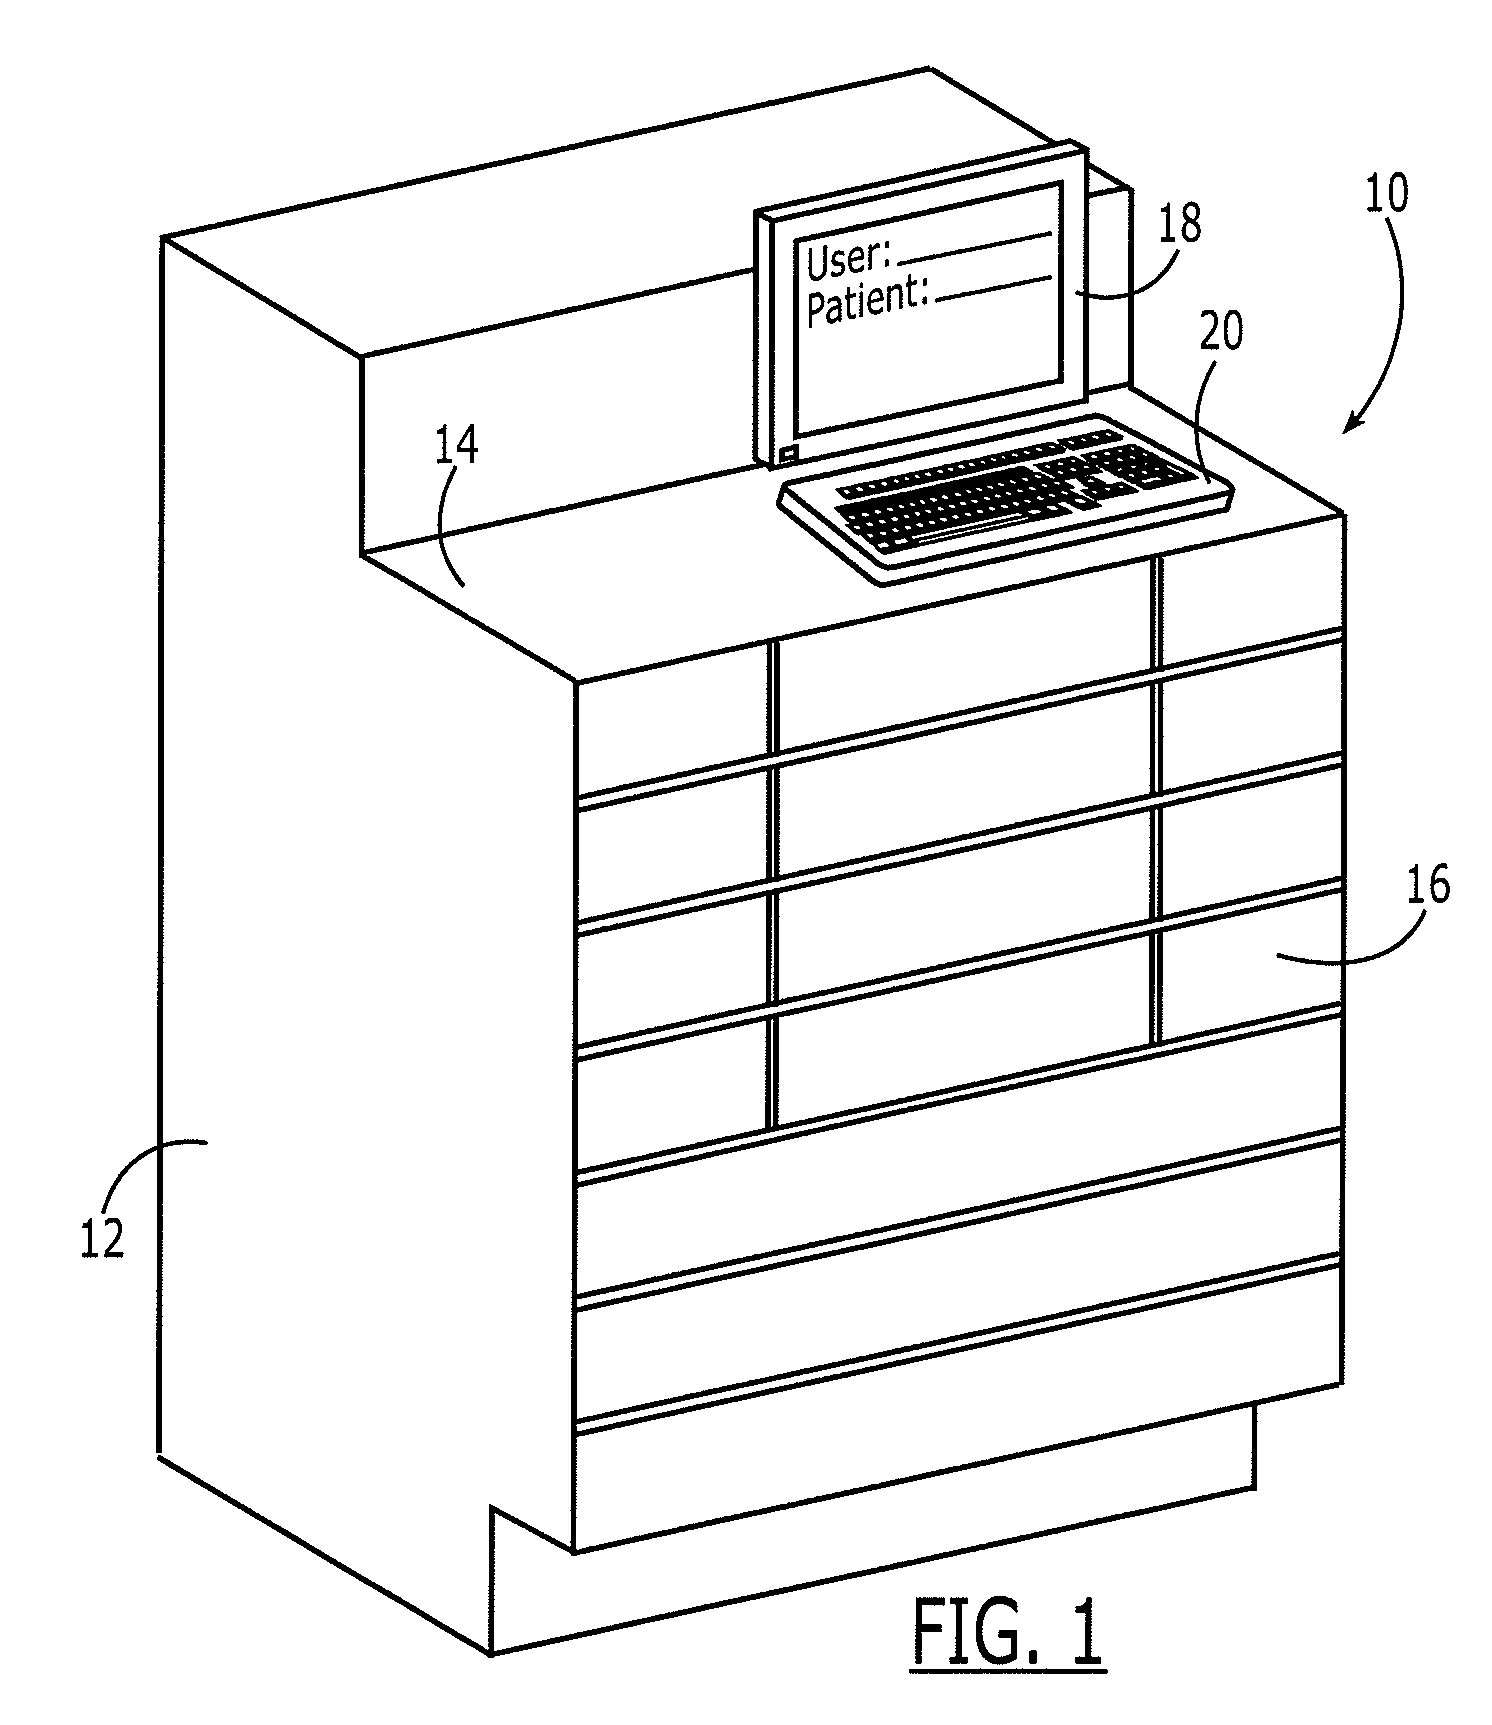 Medication dispensing cabinet and associated drawer assembly having pockets with controllably openable lids